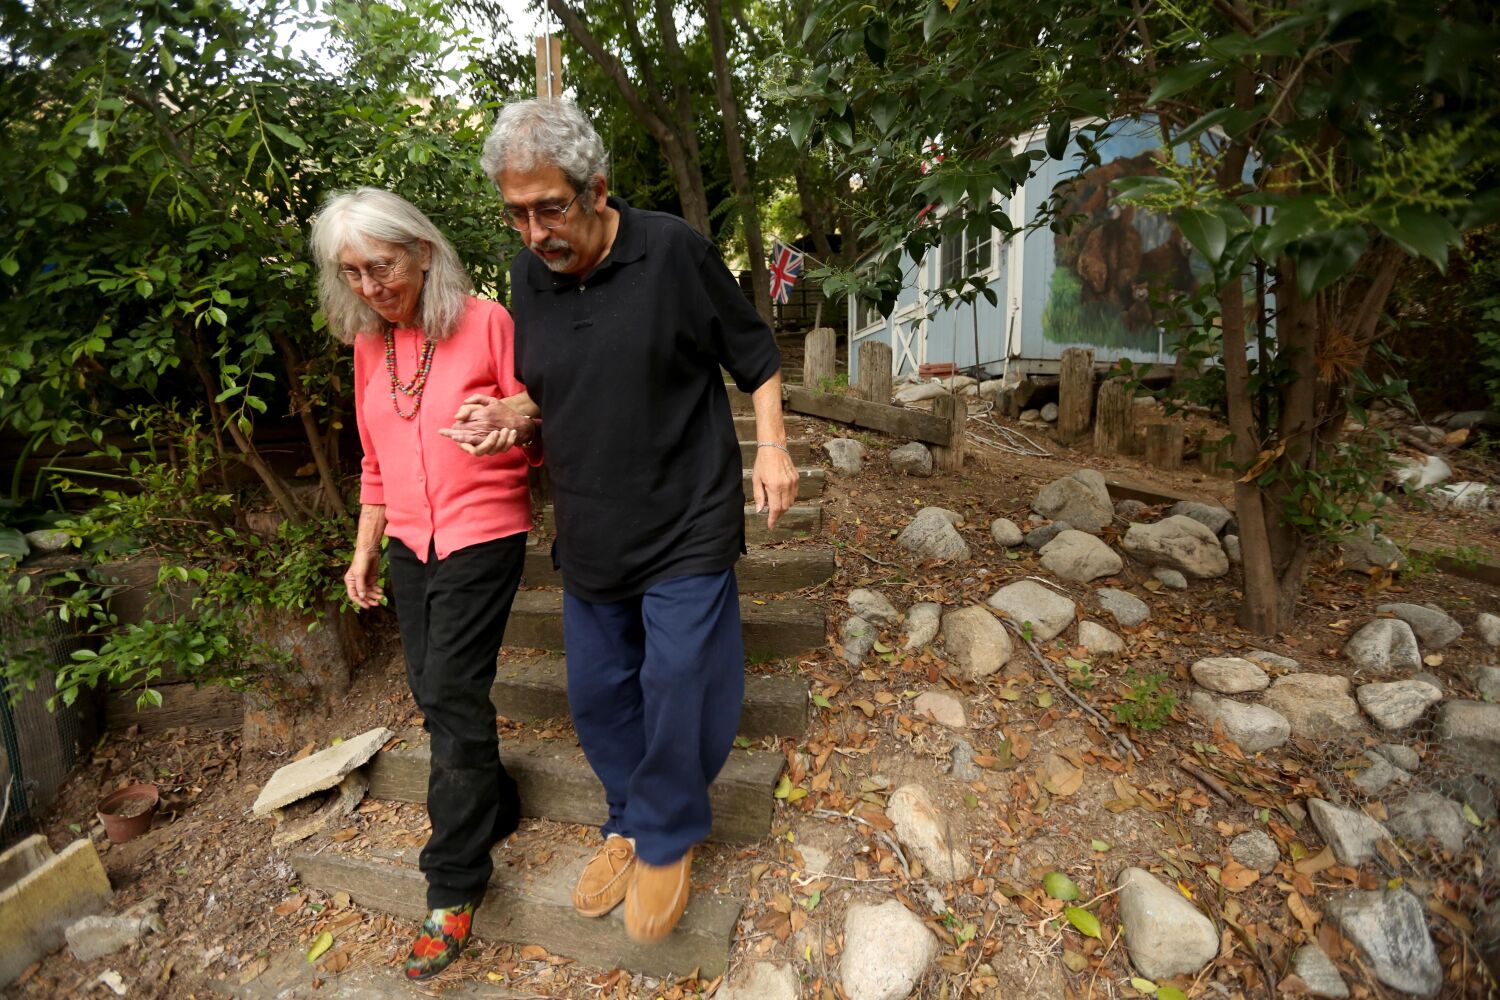 Mannie and Rose: One couple's journey through Alzheimer's, 'a very tricky thief'